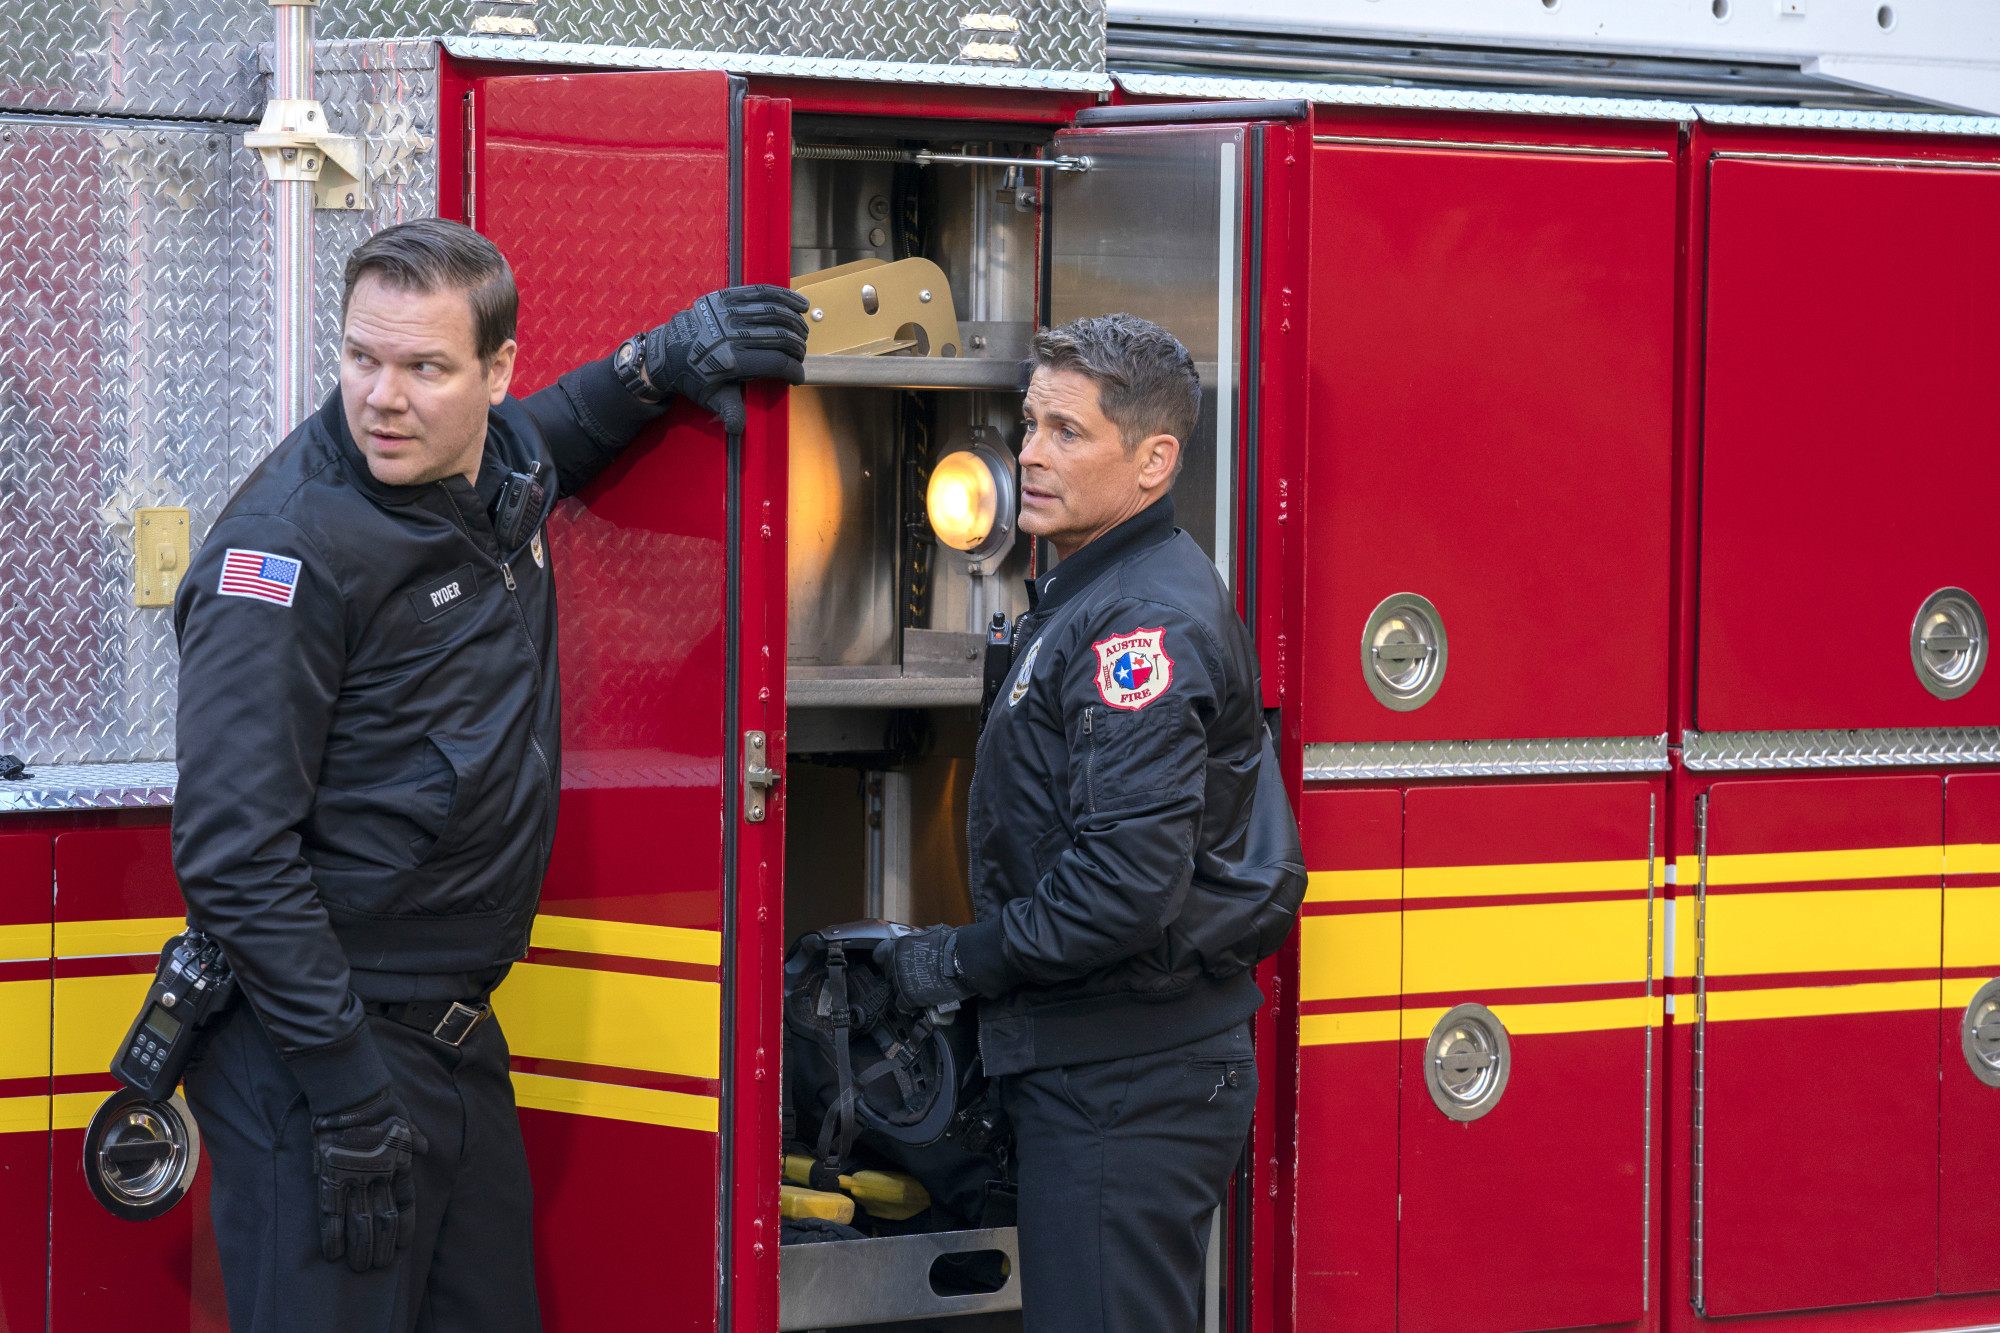 9-1-1: LONE STAR: L-R: Jim Parrack and Rob Lowe in "Awakening/Austin, We Have A Problem" two-hour season finale of 9-1-1: LONE STAR airing Monday, March 9 (8:00-10:00 PM ET/PT) on FOX. ©2020 Fox Media LLC. CR: Jack Zeman/FOX.